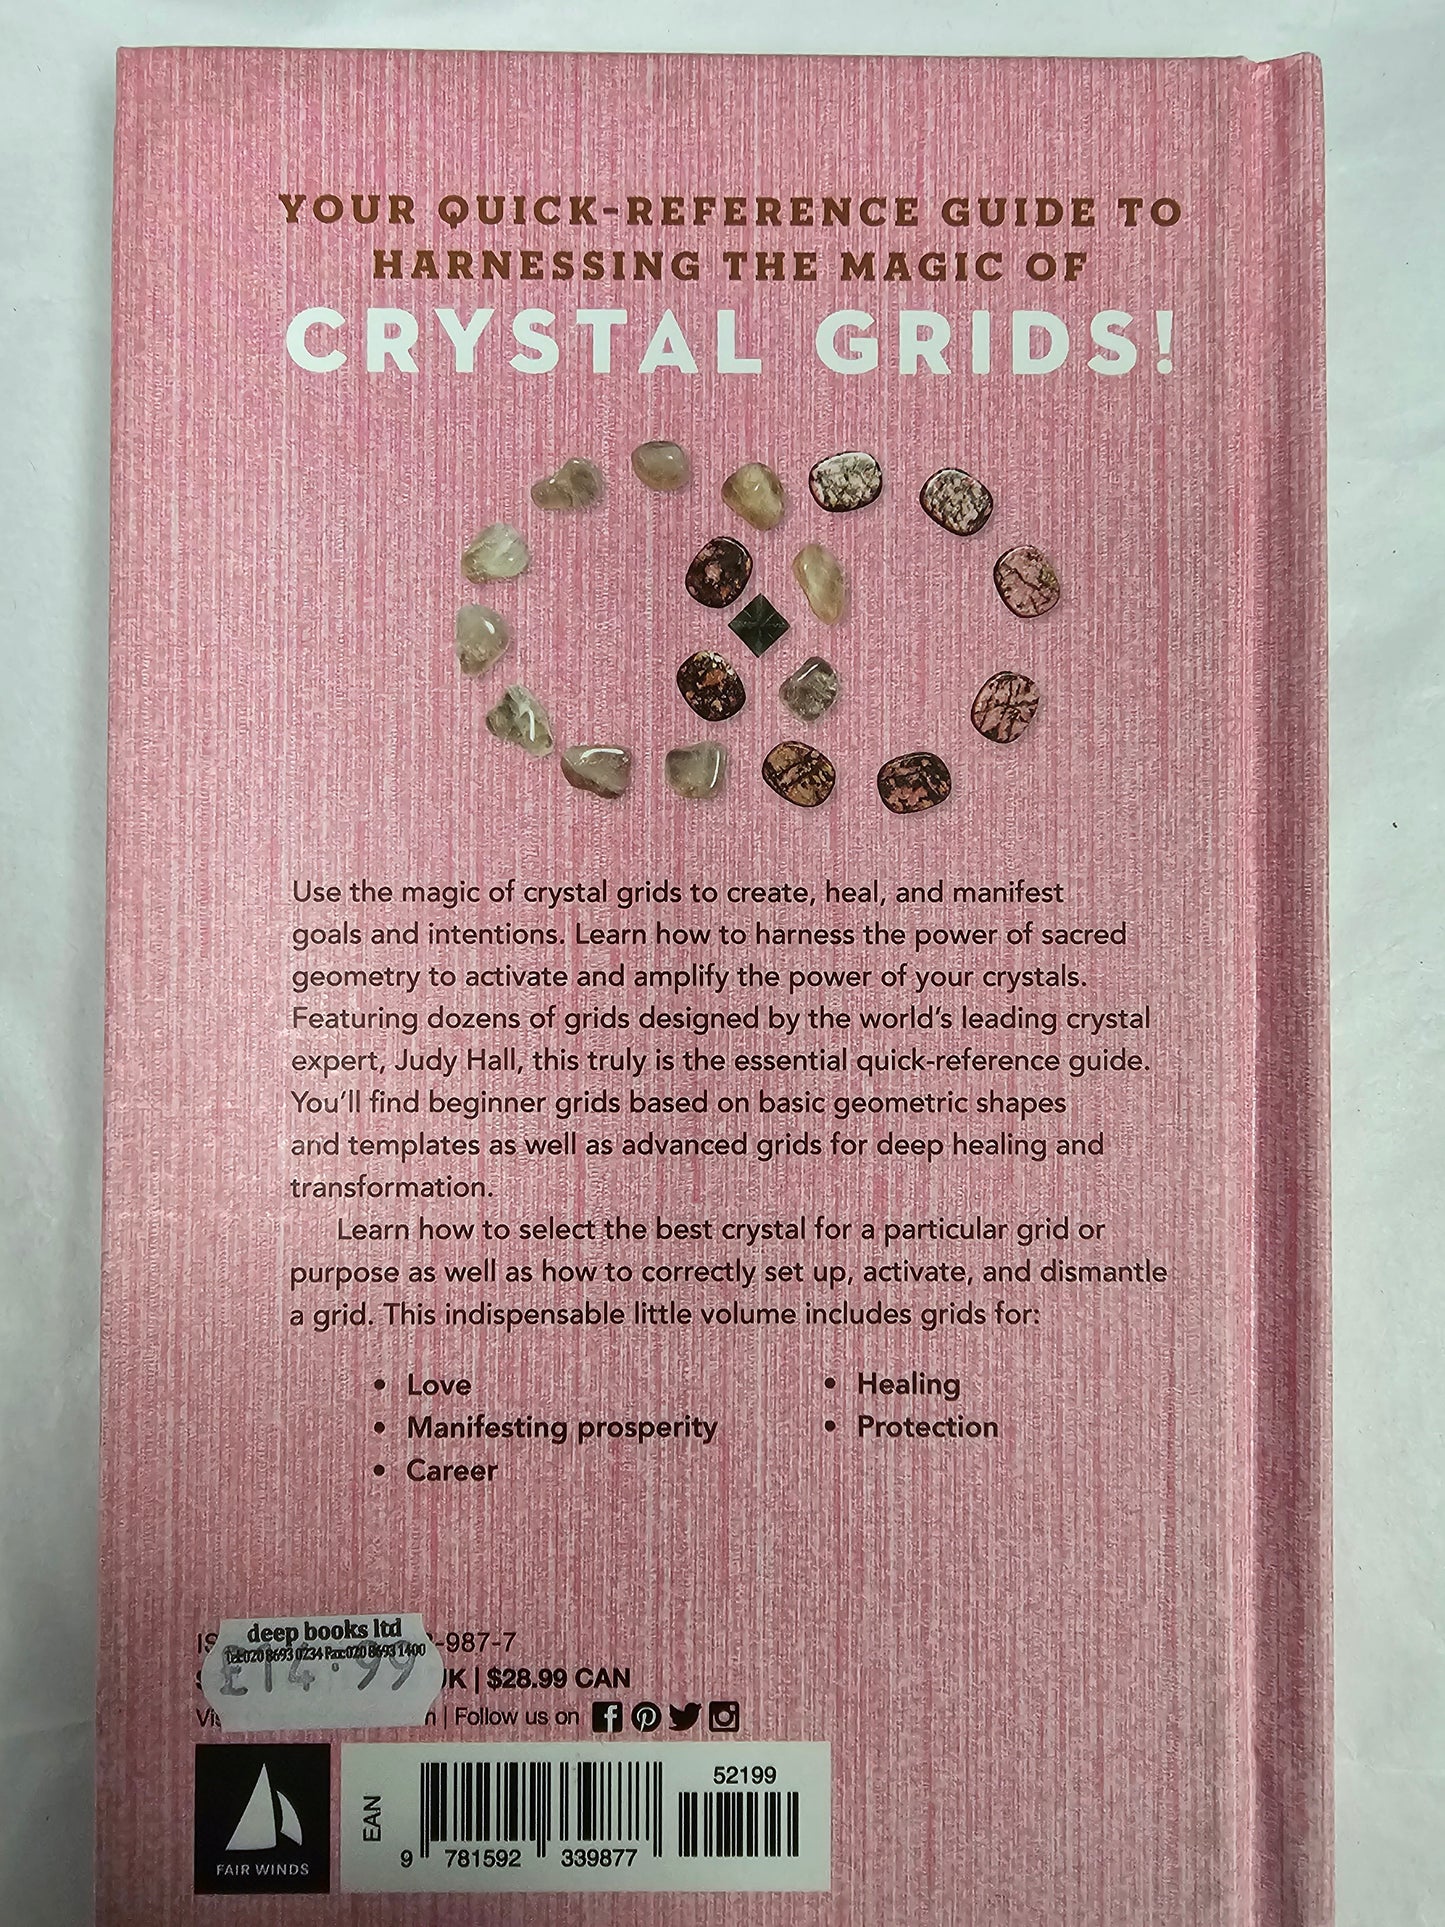 Crystal Grids book